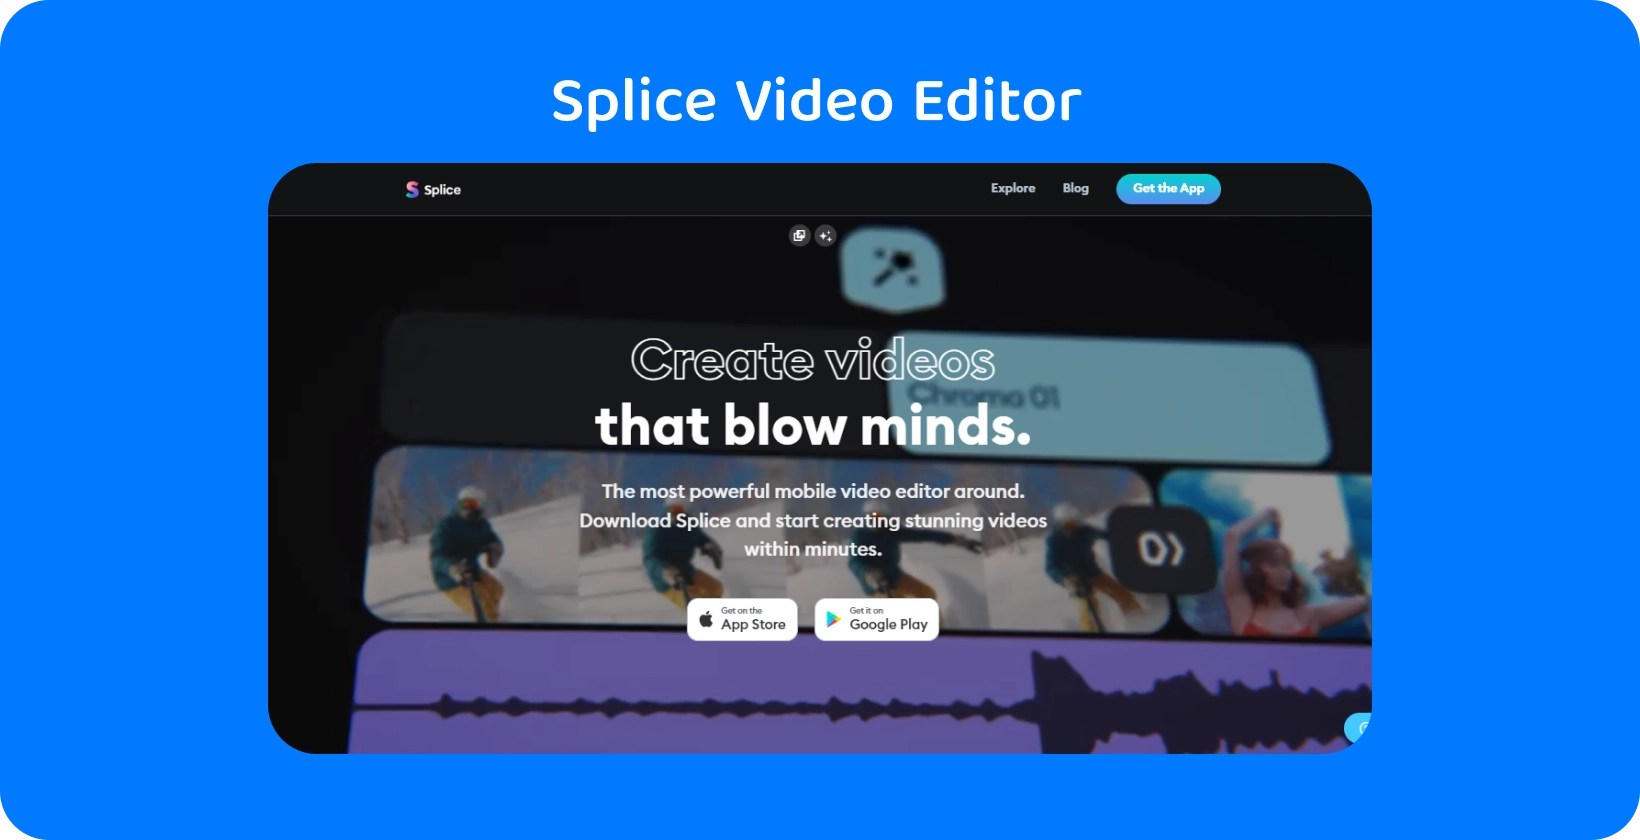 Splice app promotion on a smartphone, touting it as the most powerful mobile video editor for creating stunning videos.